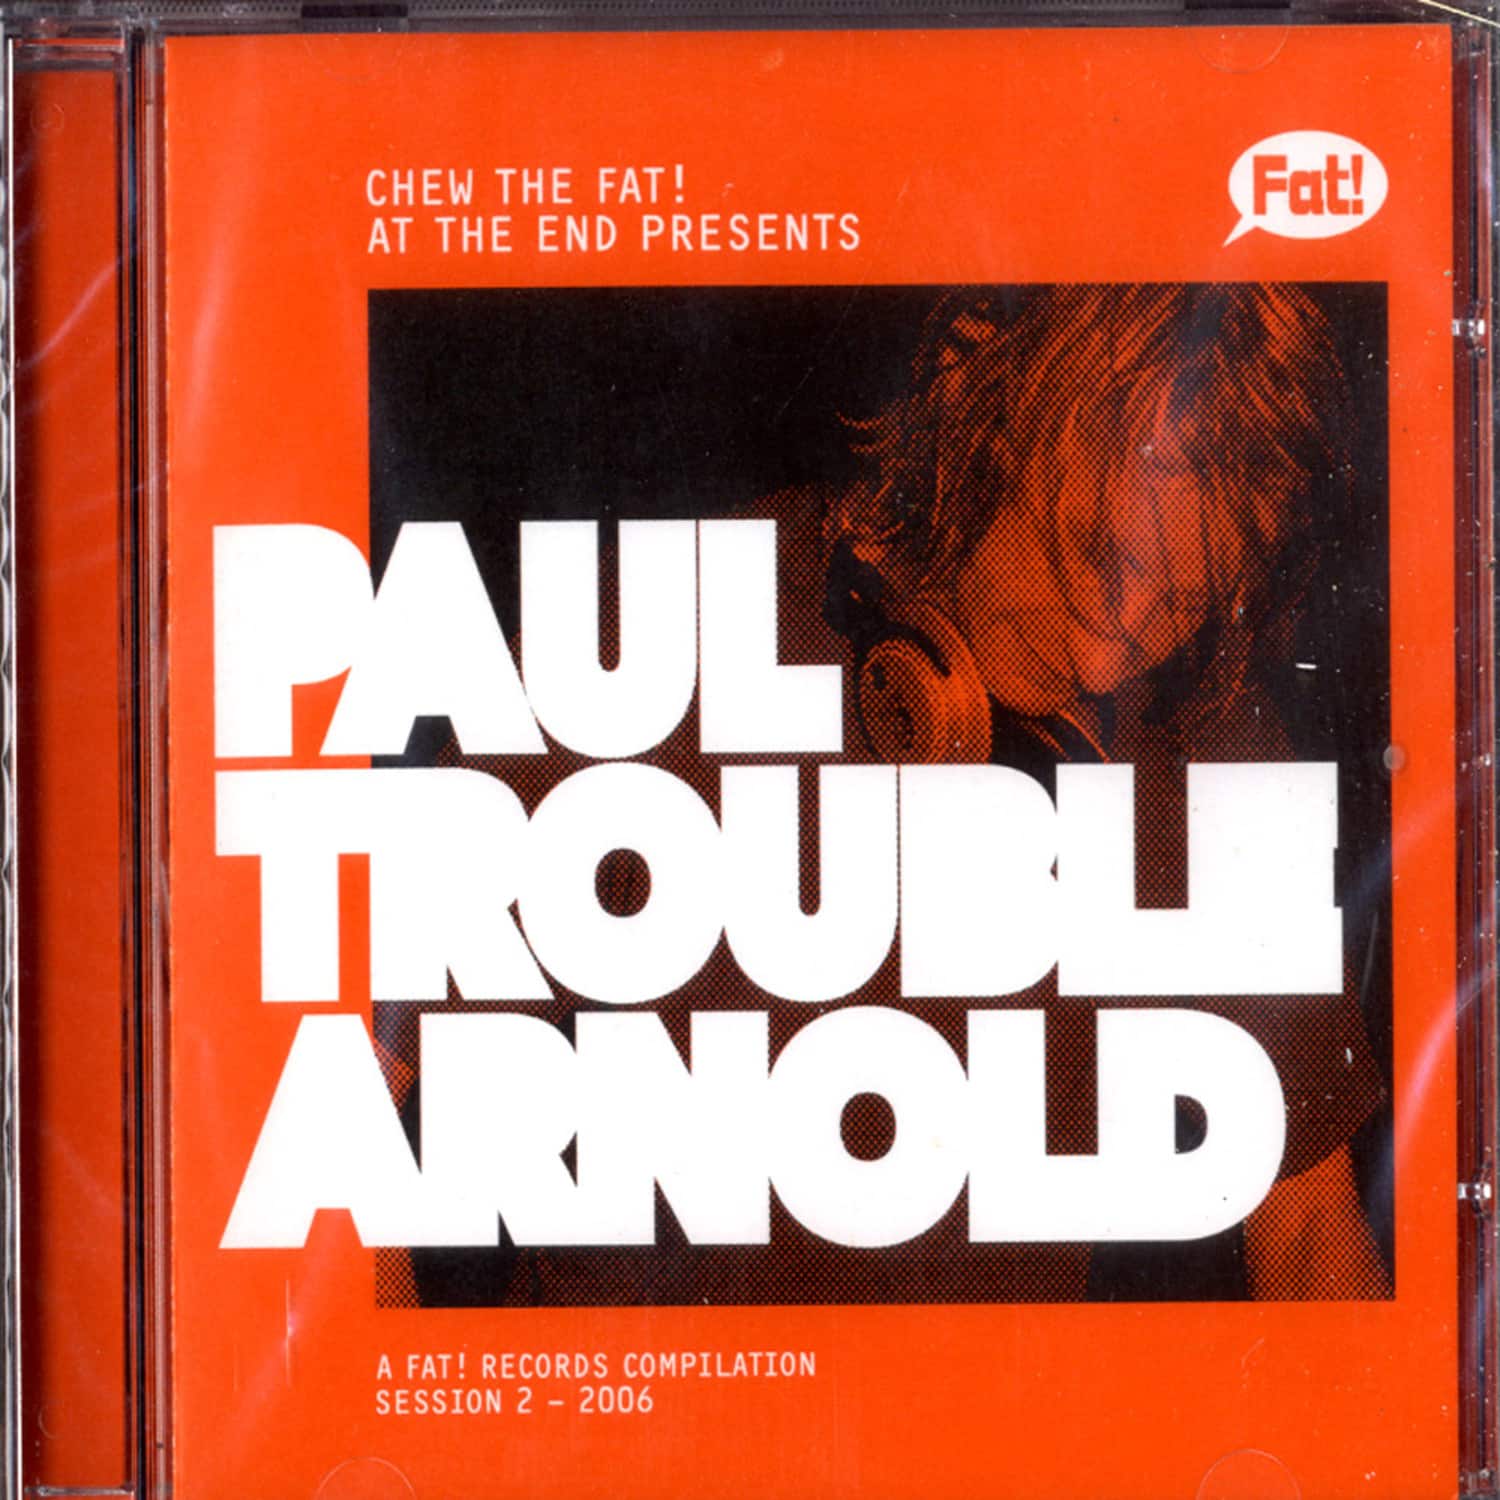 V/A mixed by Paul Trouble Arnold - COMPILATION SESSION 2 